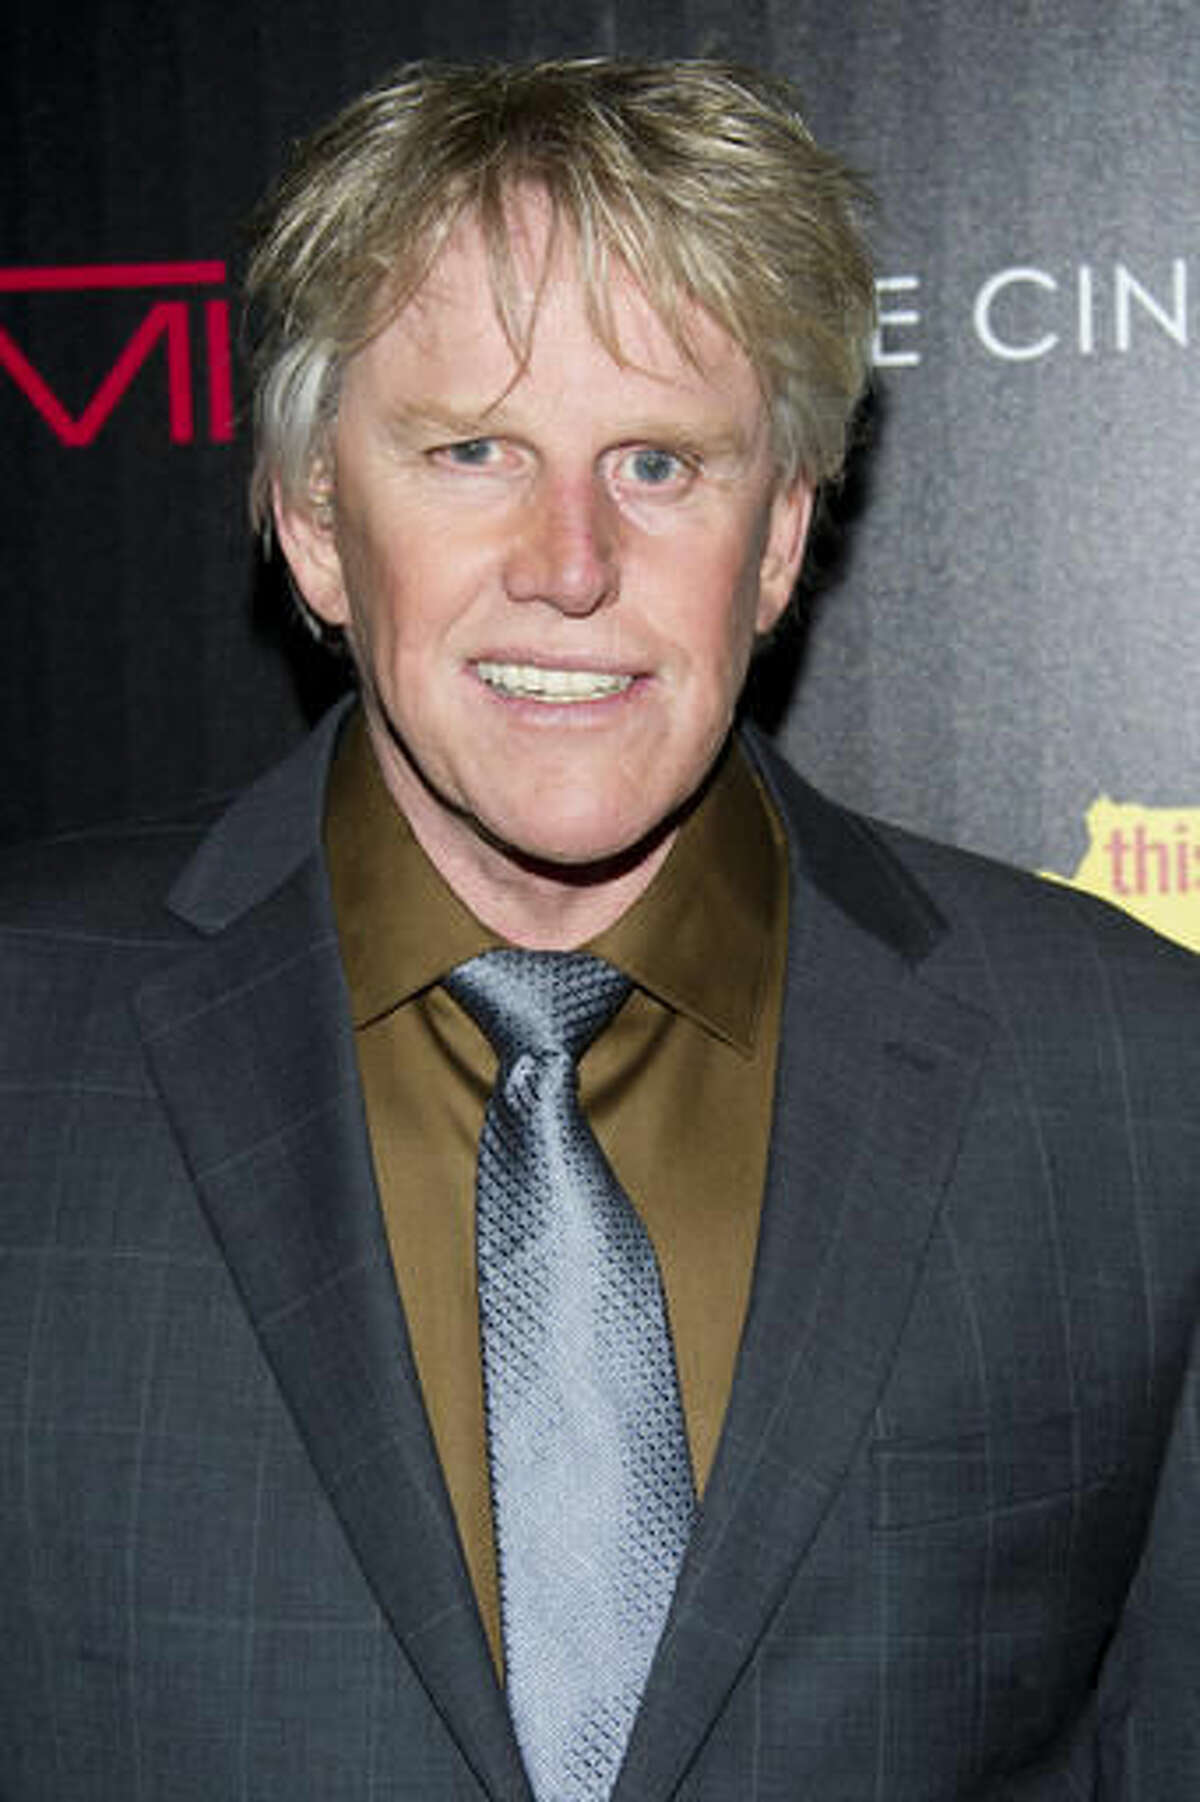 FILE - In this Oct. 25, 2012 file photo, Gary Busey attends a screening of "This Must Be the Place" in New York. Busey is making his New York stage debut playing a serial killer in “Perfect Crime” from Nov. 21-Dec. 4 at The Theater Center. (Photo by Charles Sykes/Invision/AP, File)